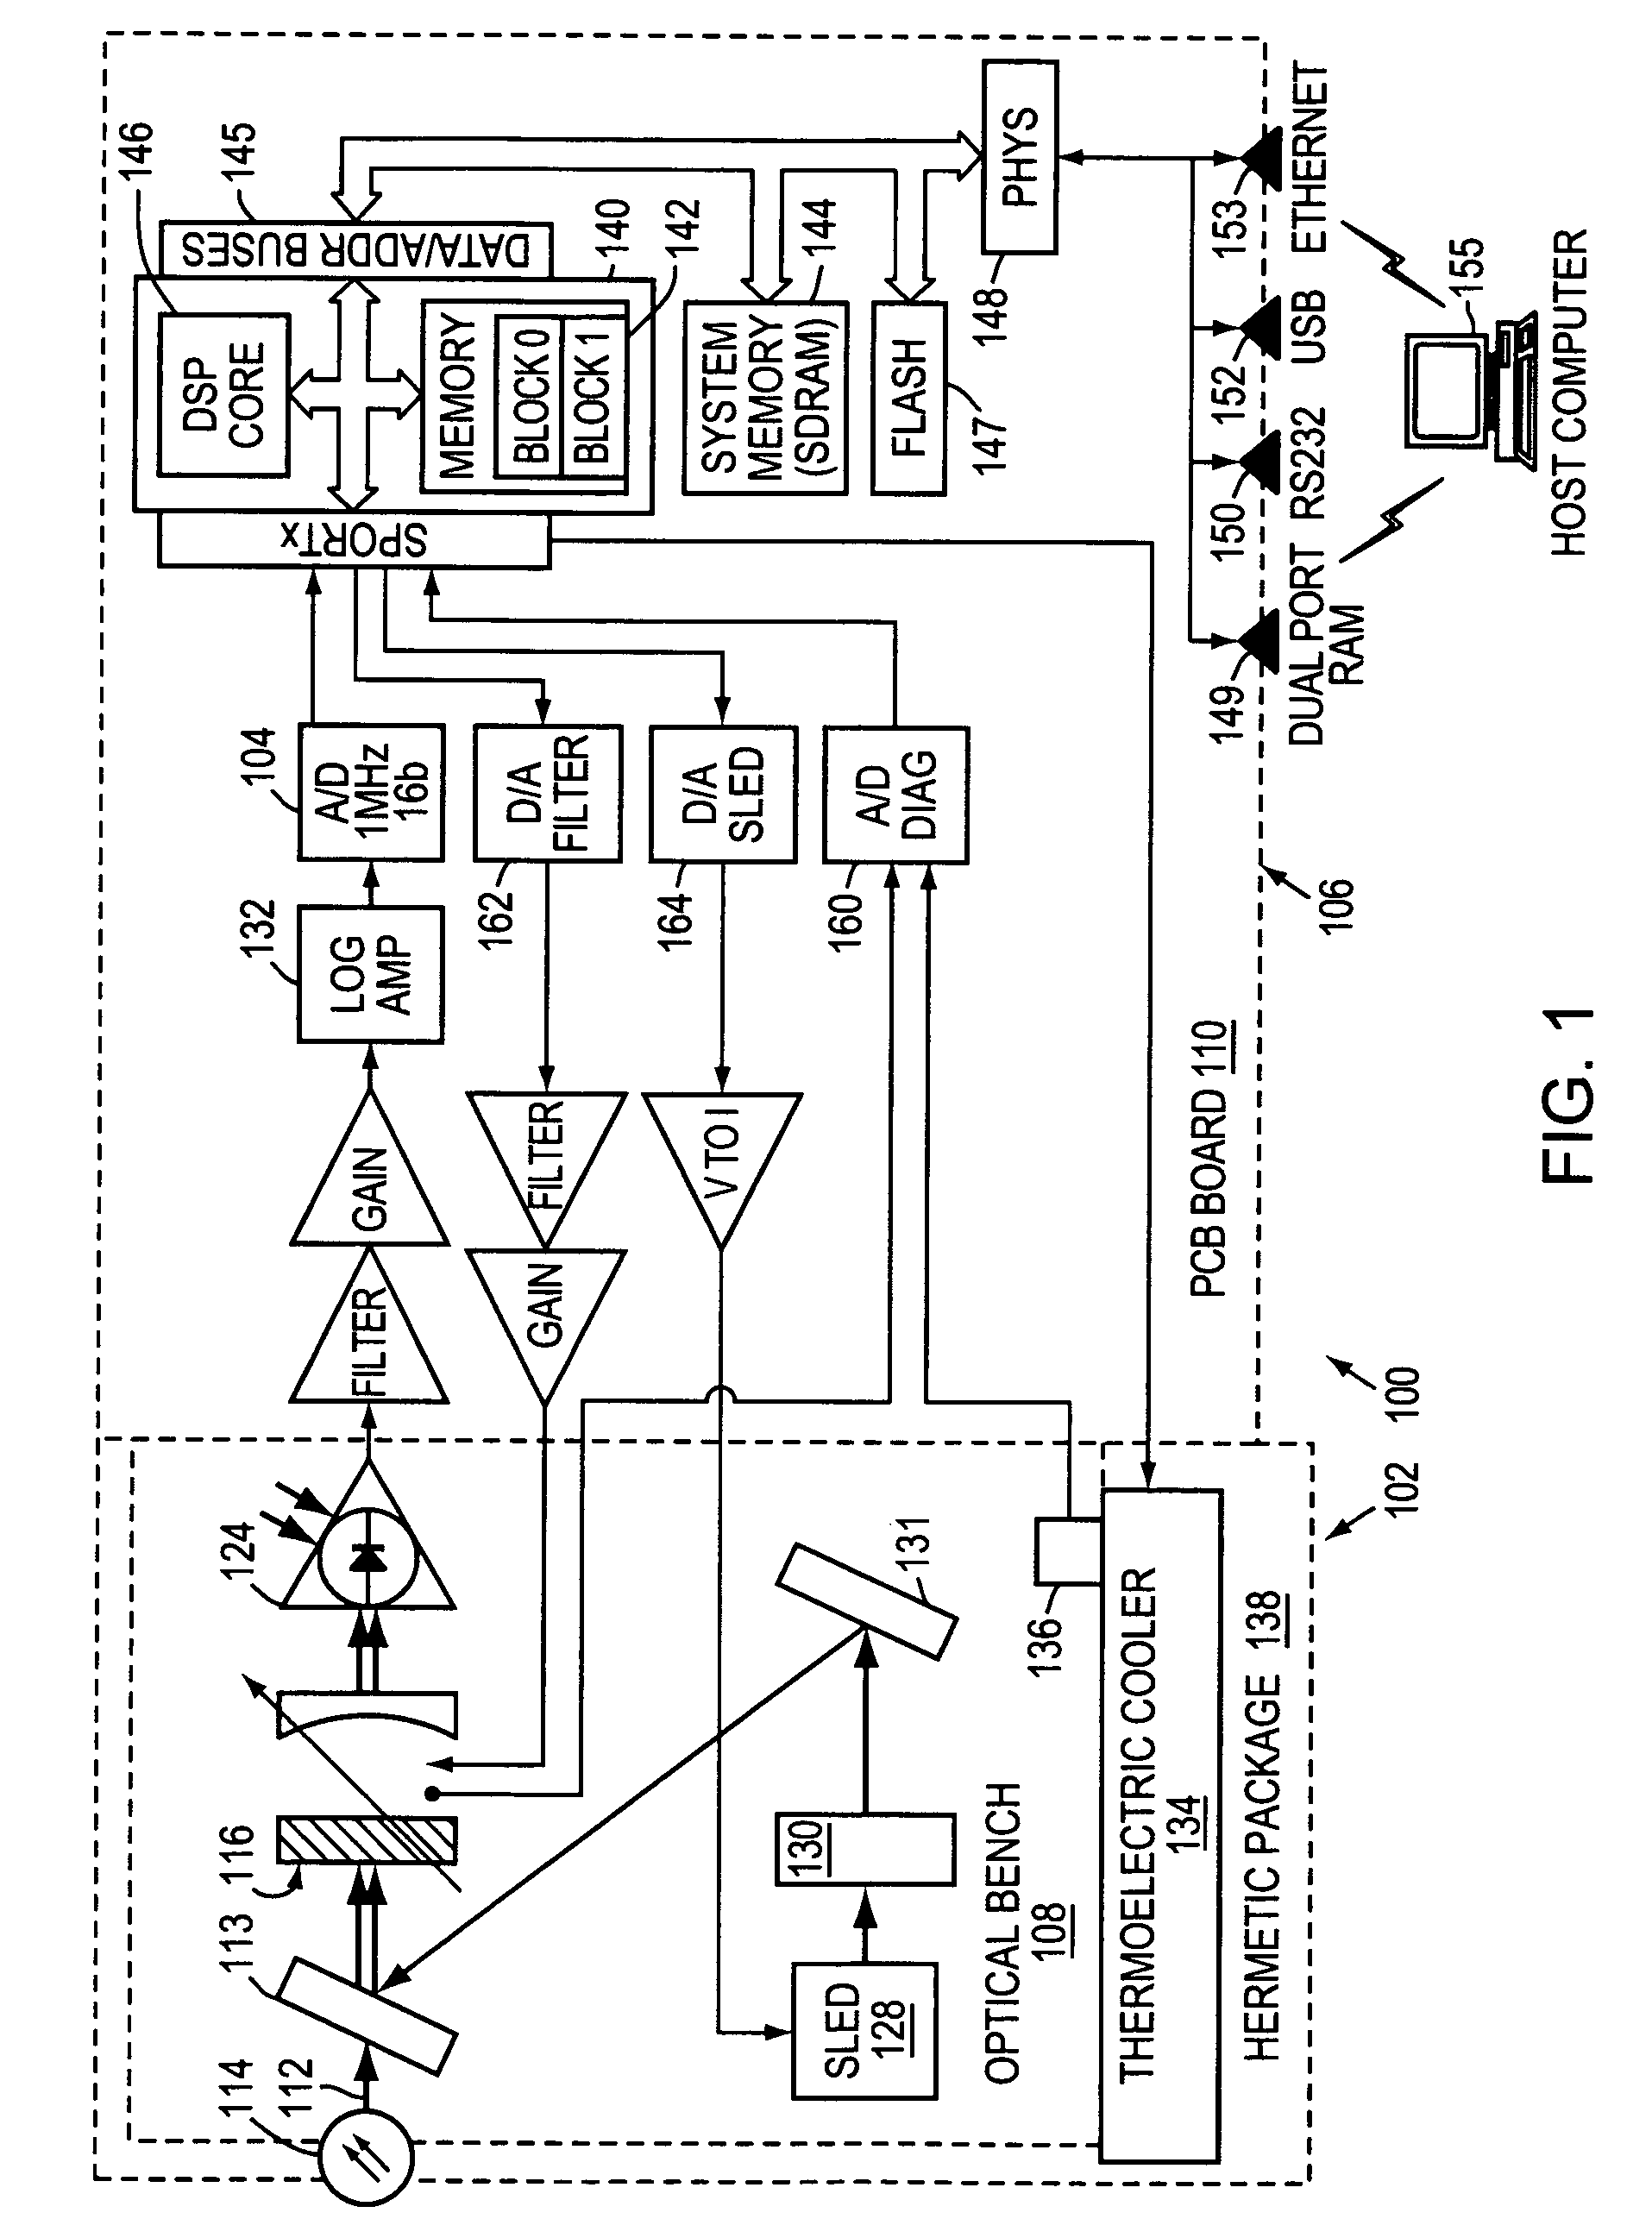 System and method for optical spectrum fast peak reporting